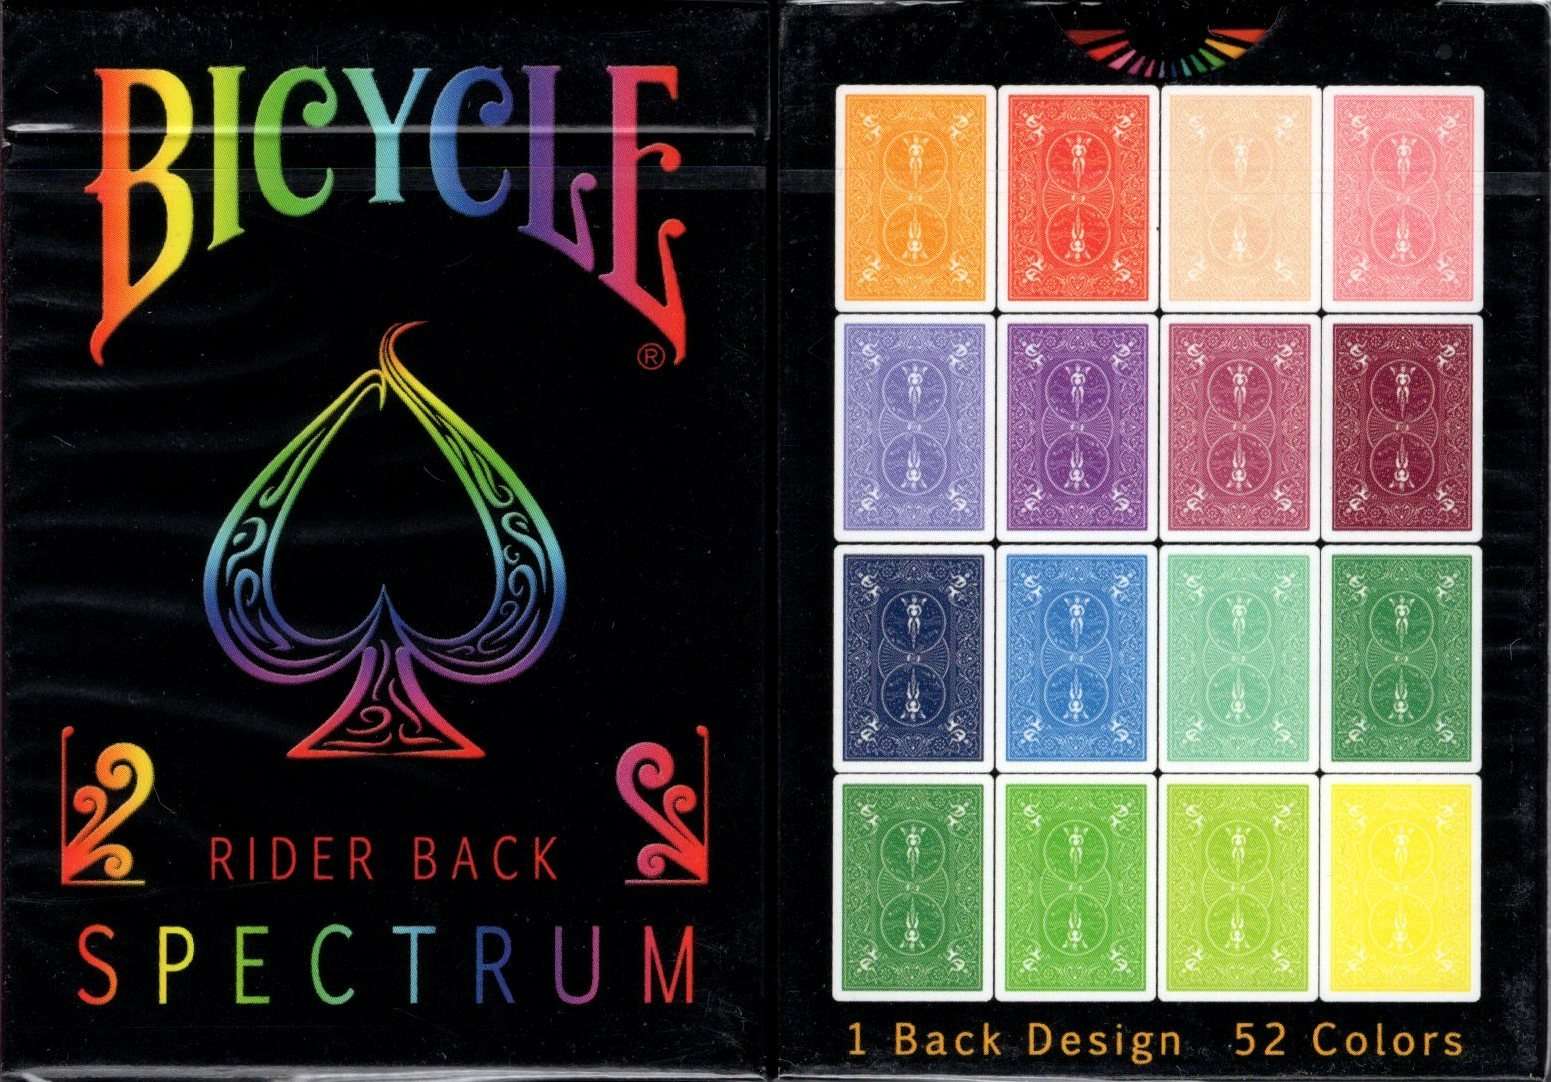 Rider Back Spectrum v2 Bicycle Playing Cards